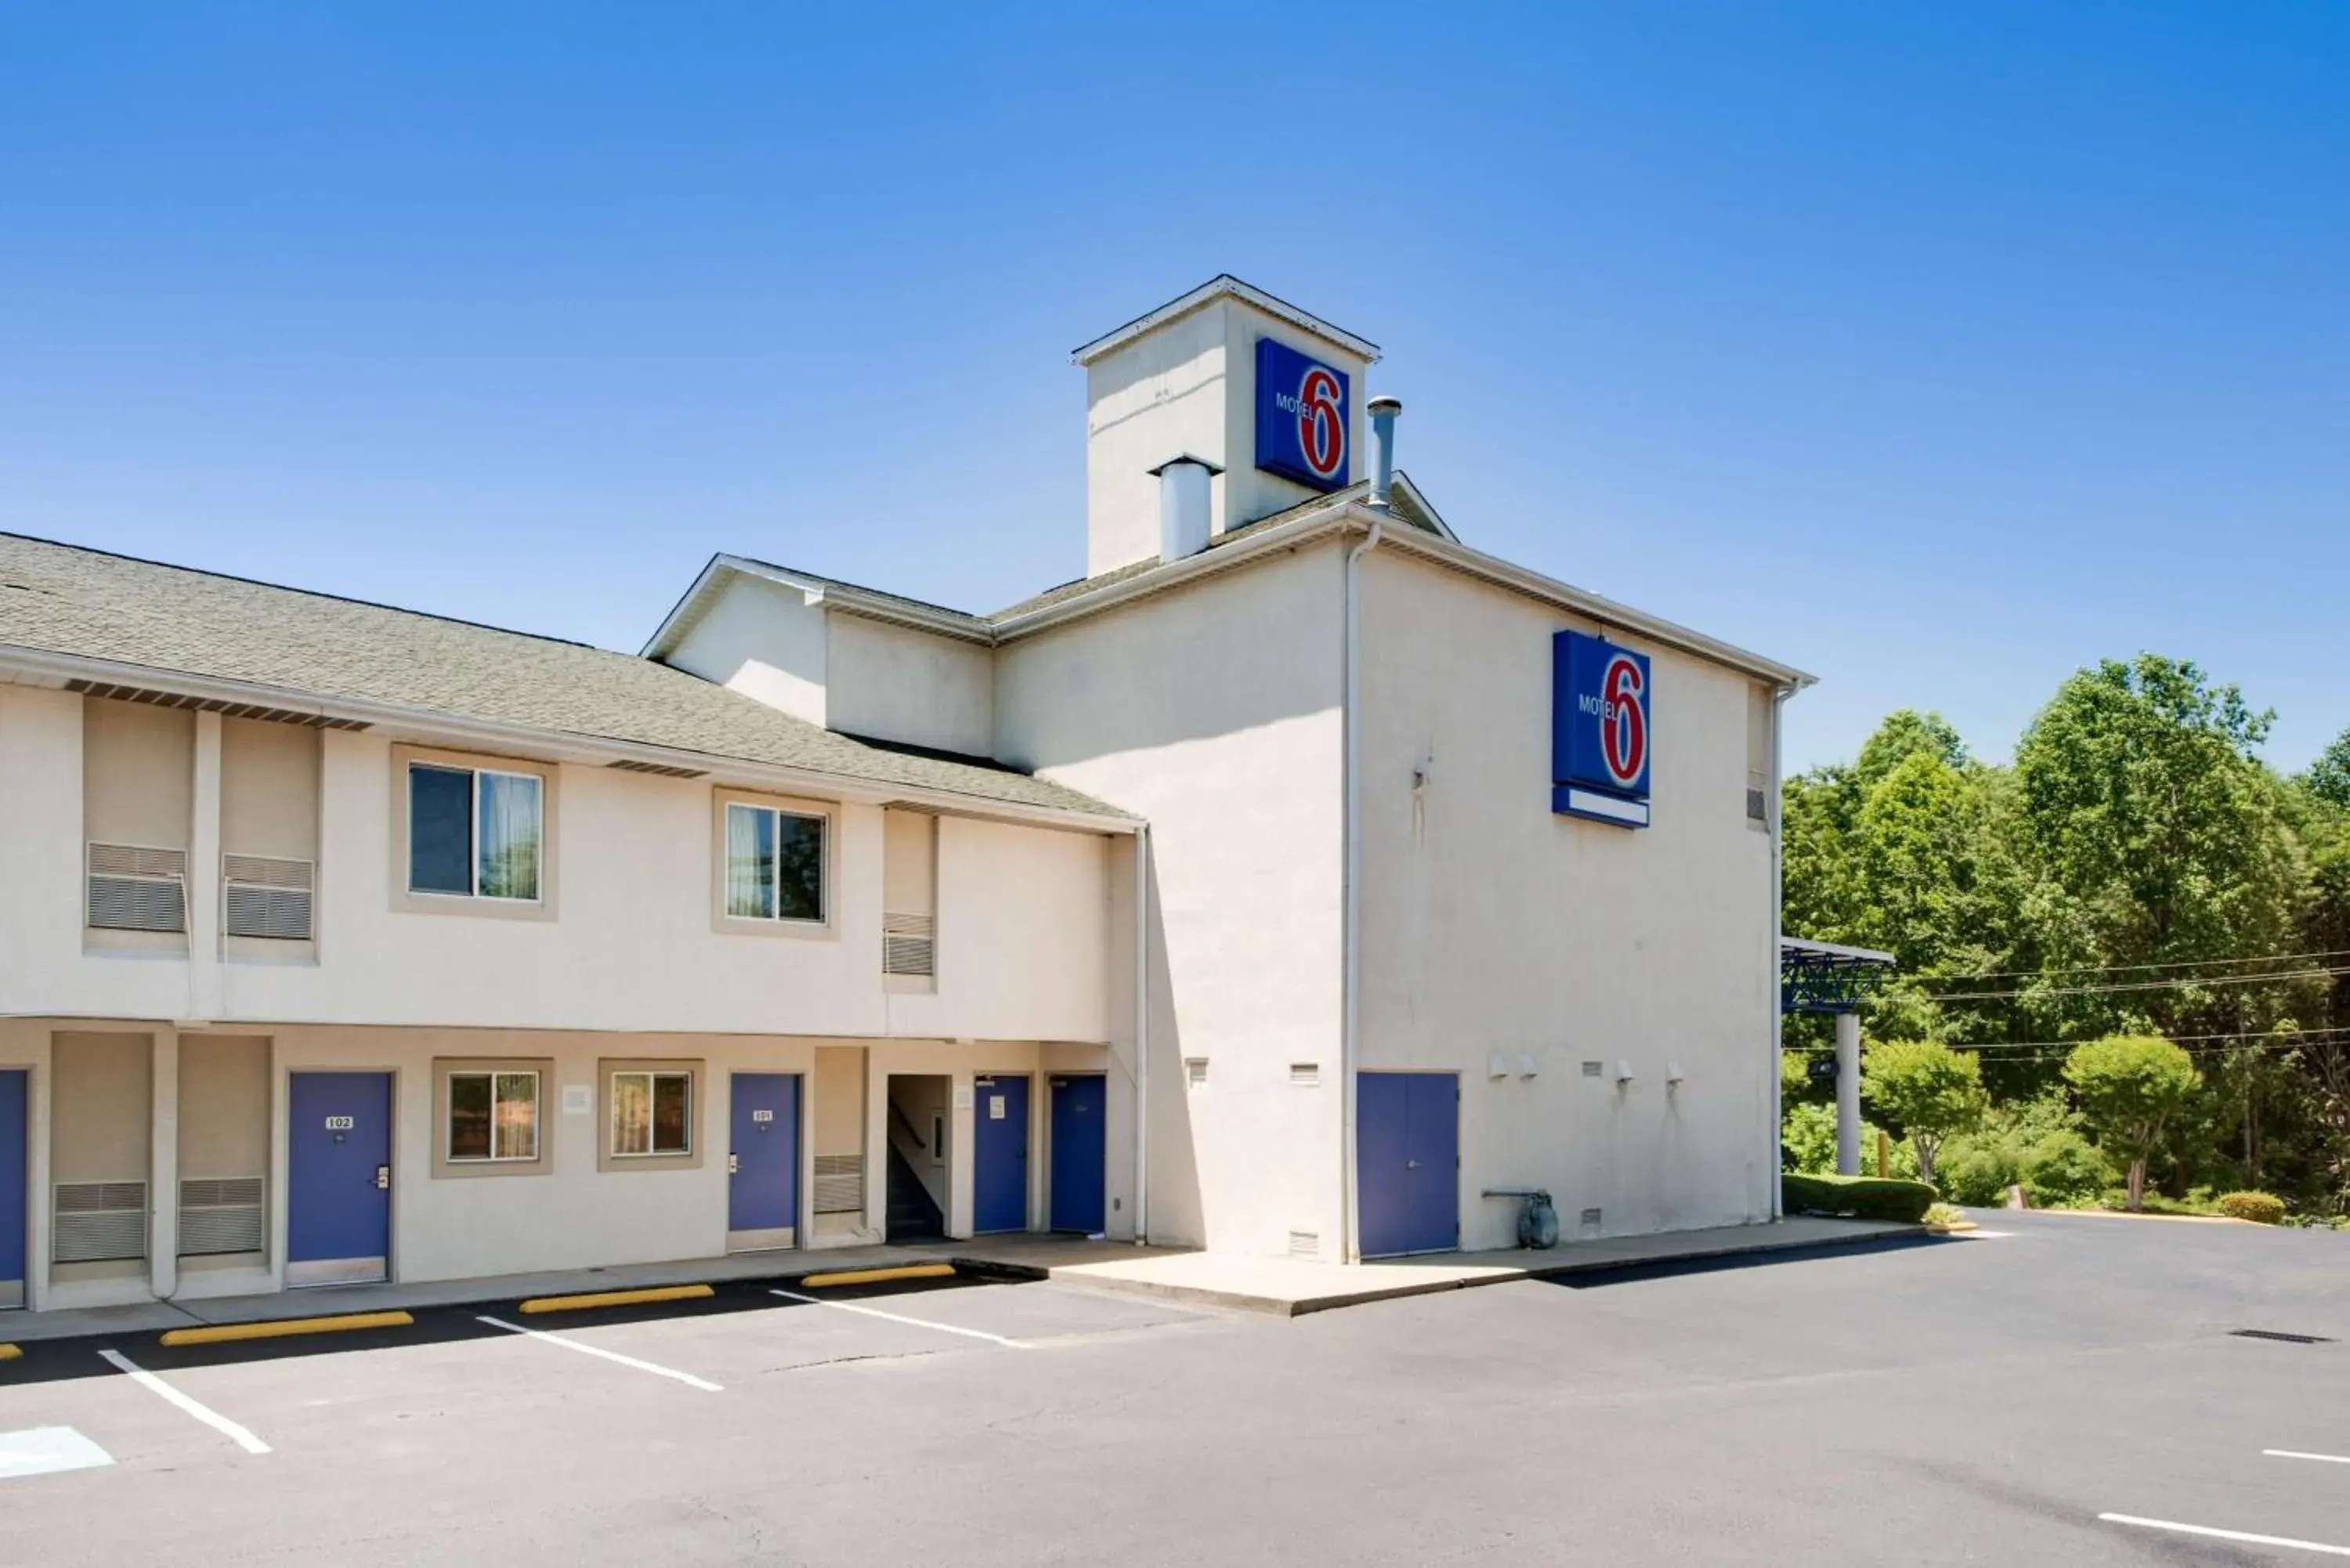 Property building, Facade/Entrance in Motel 6-Statesville, NC